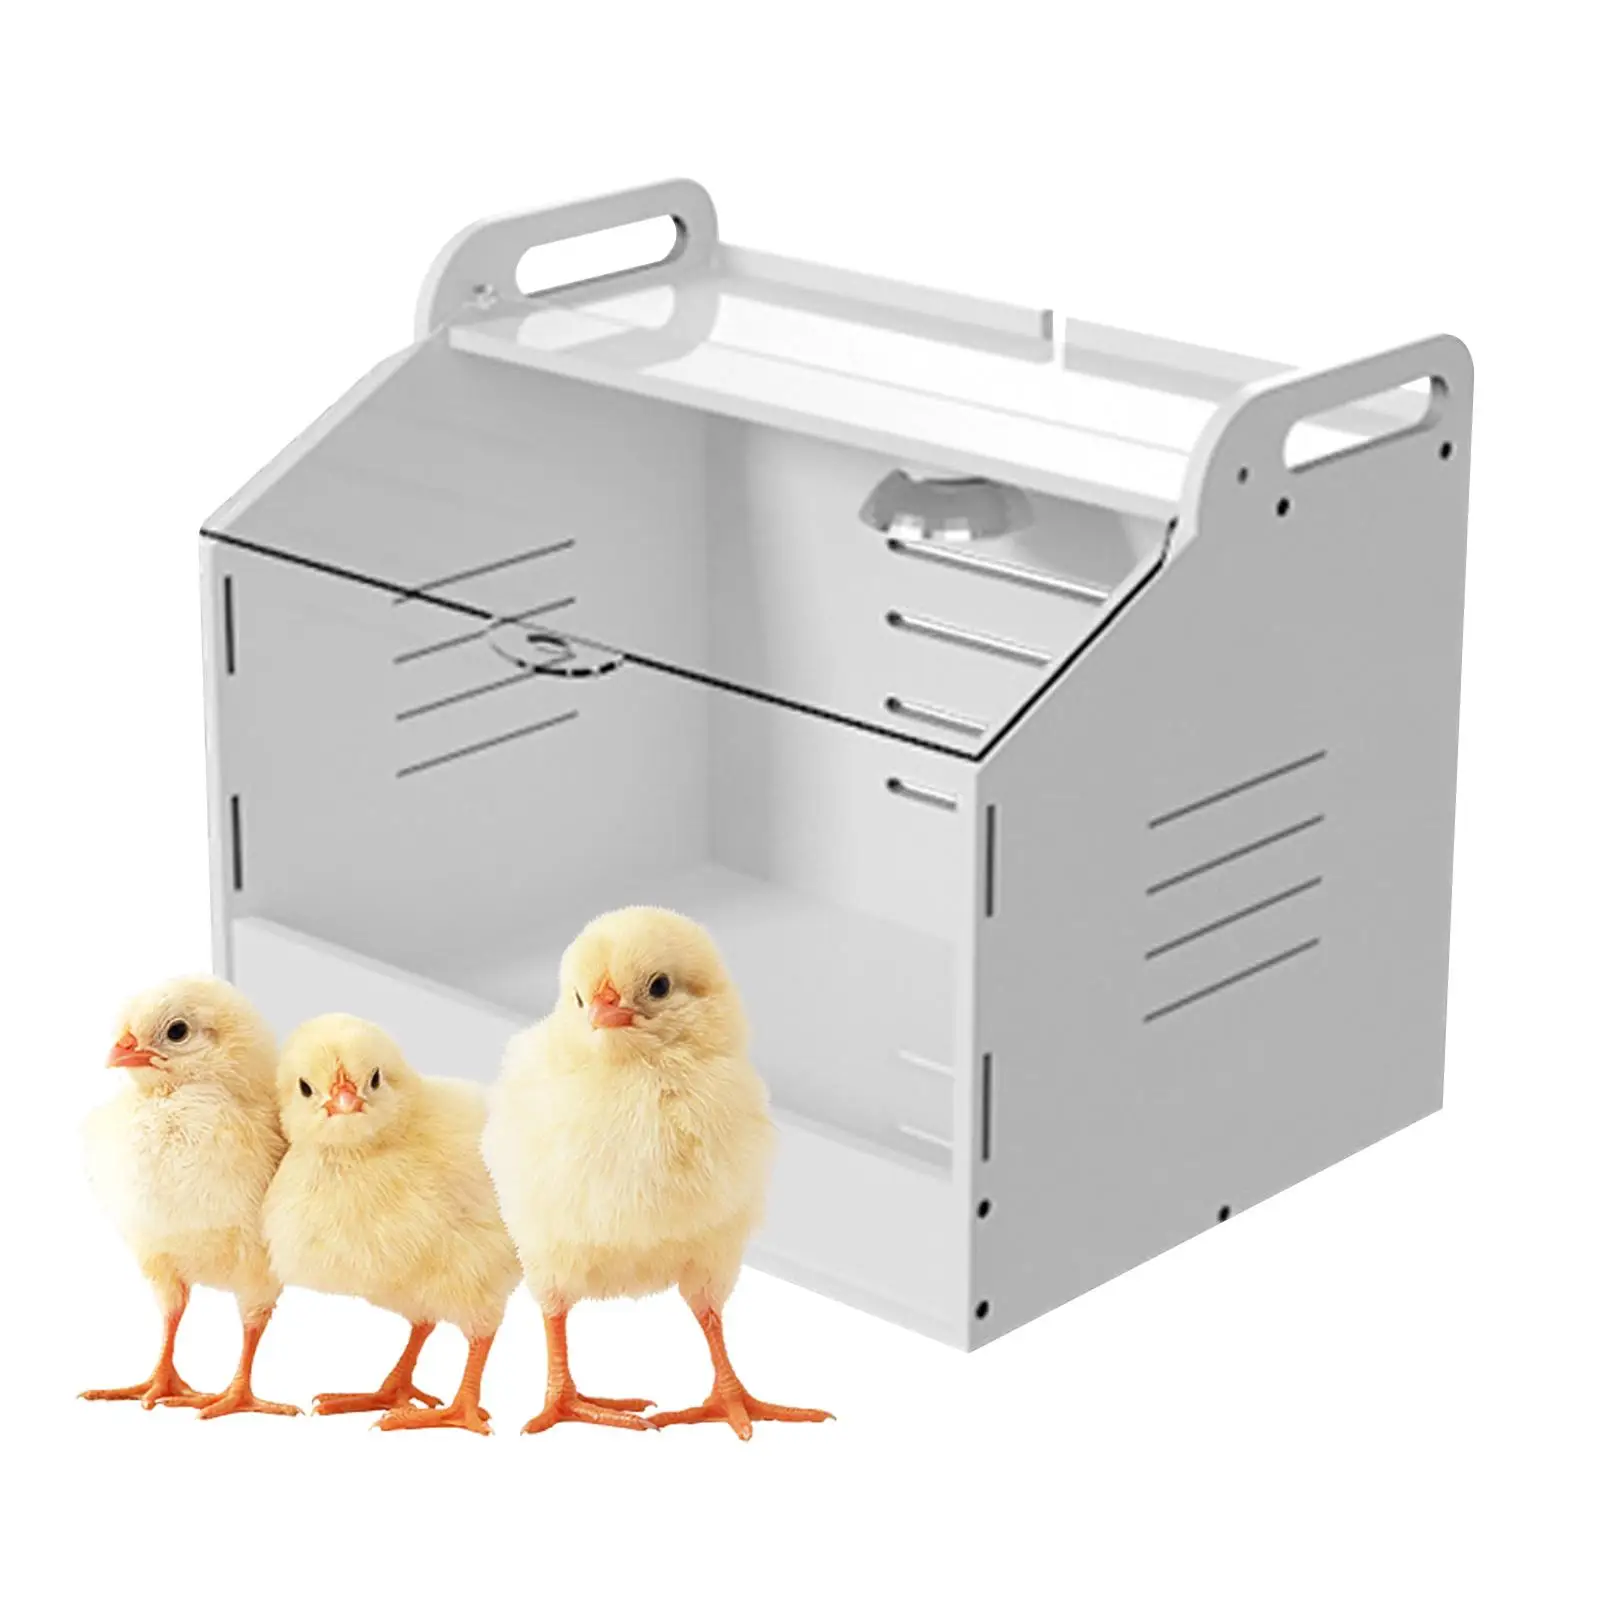 Egg Incubator Hatching Clear Top Cover Automatic Poultry Hatcher Machine for Duck